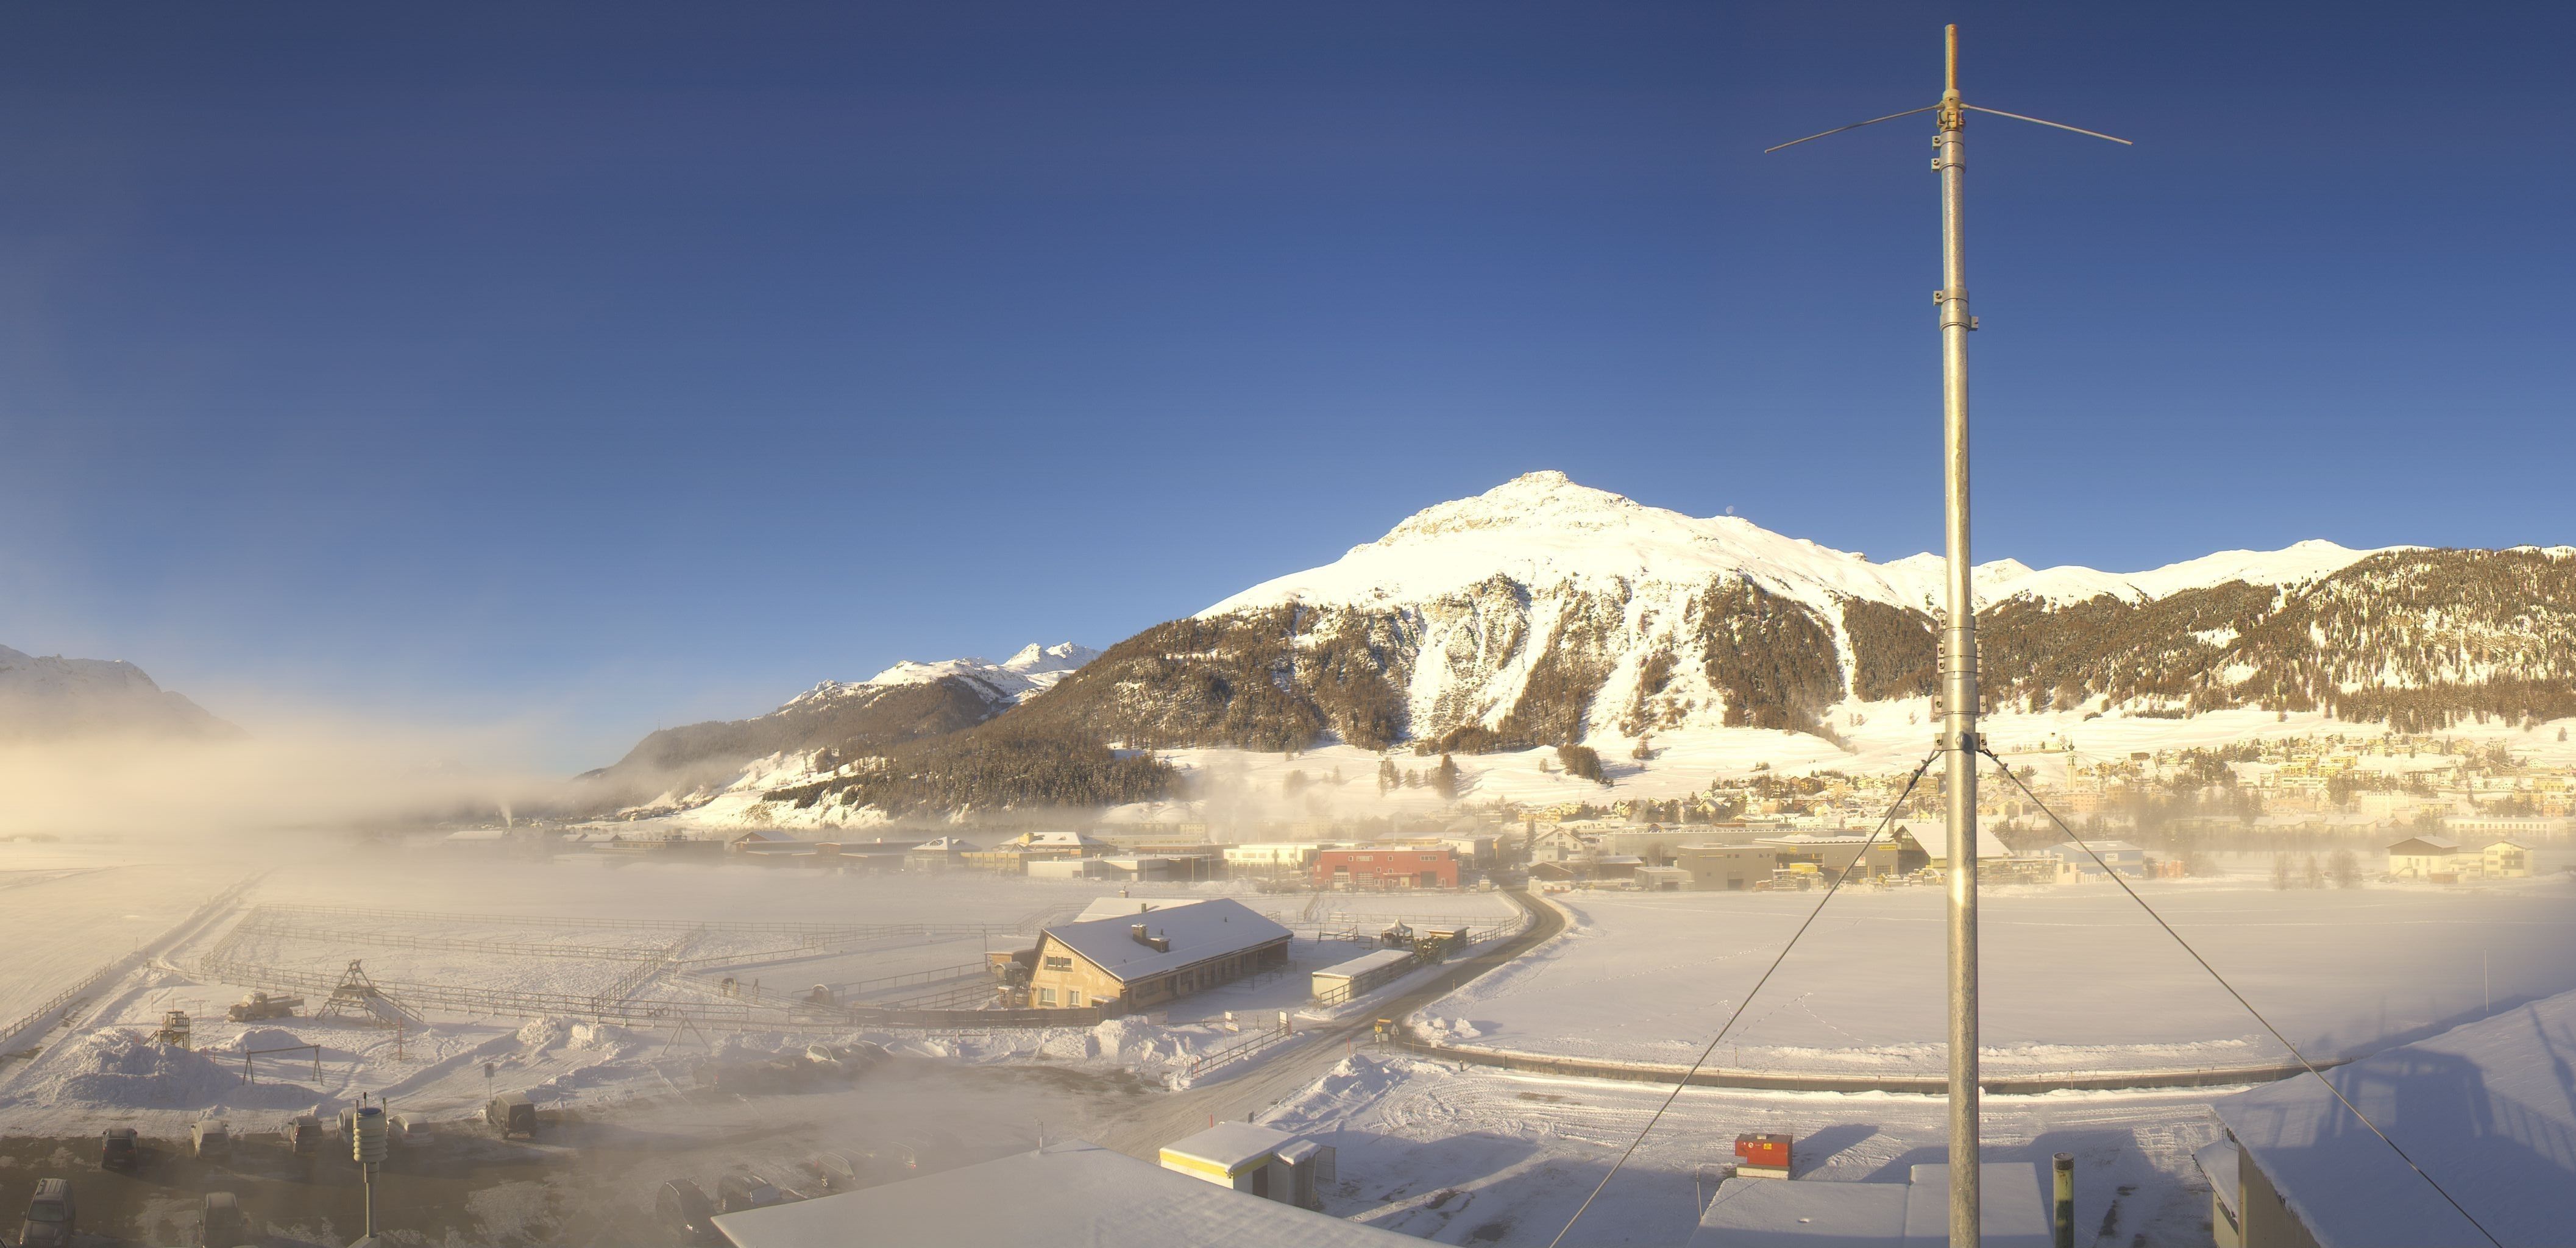 Bitterly cold in Samedan, where a minimum temperature of -26.2 degrees was recorded this morning (roundshot.com)